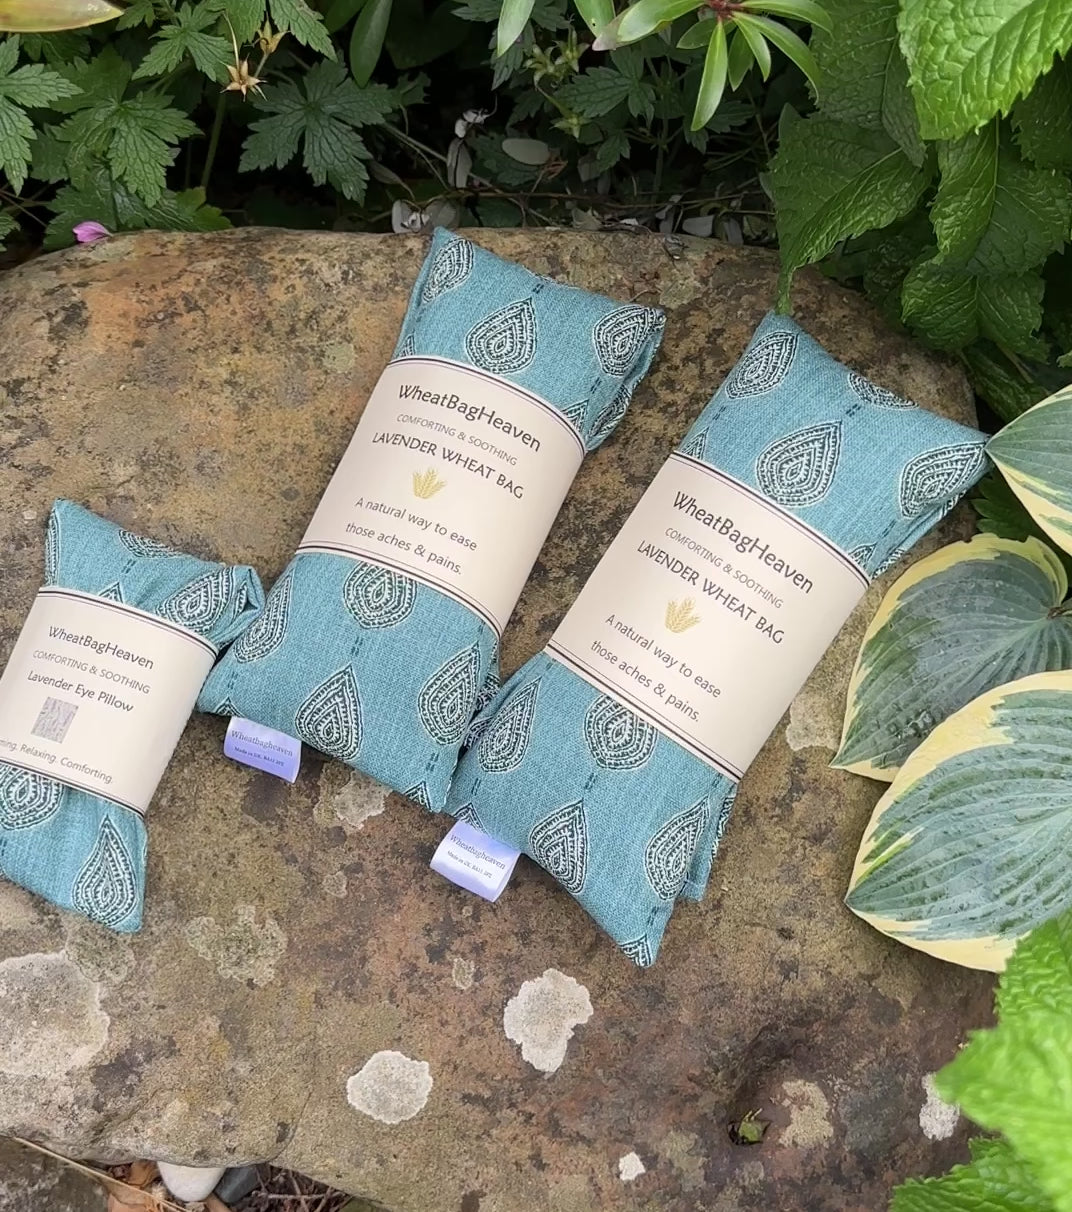 short video of WheatBagHeaven teal blue eye pillows and wheat bags with a garden backdrop 